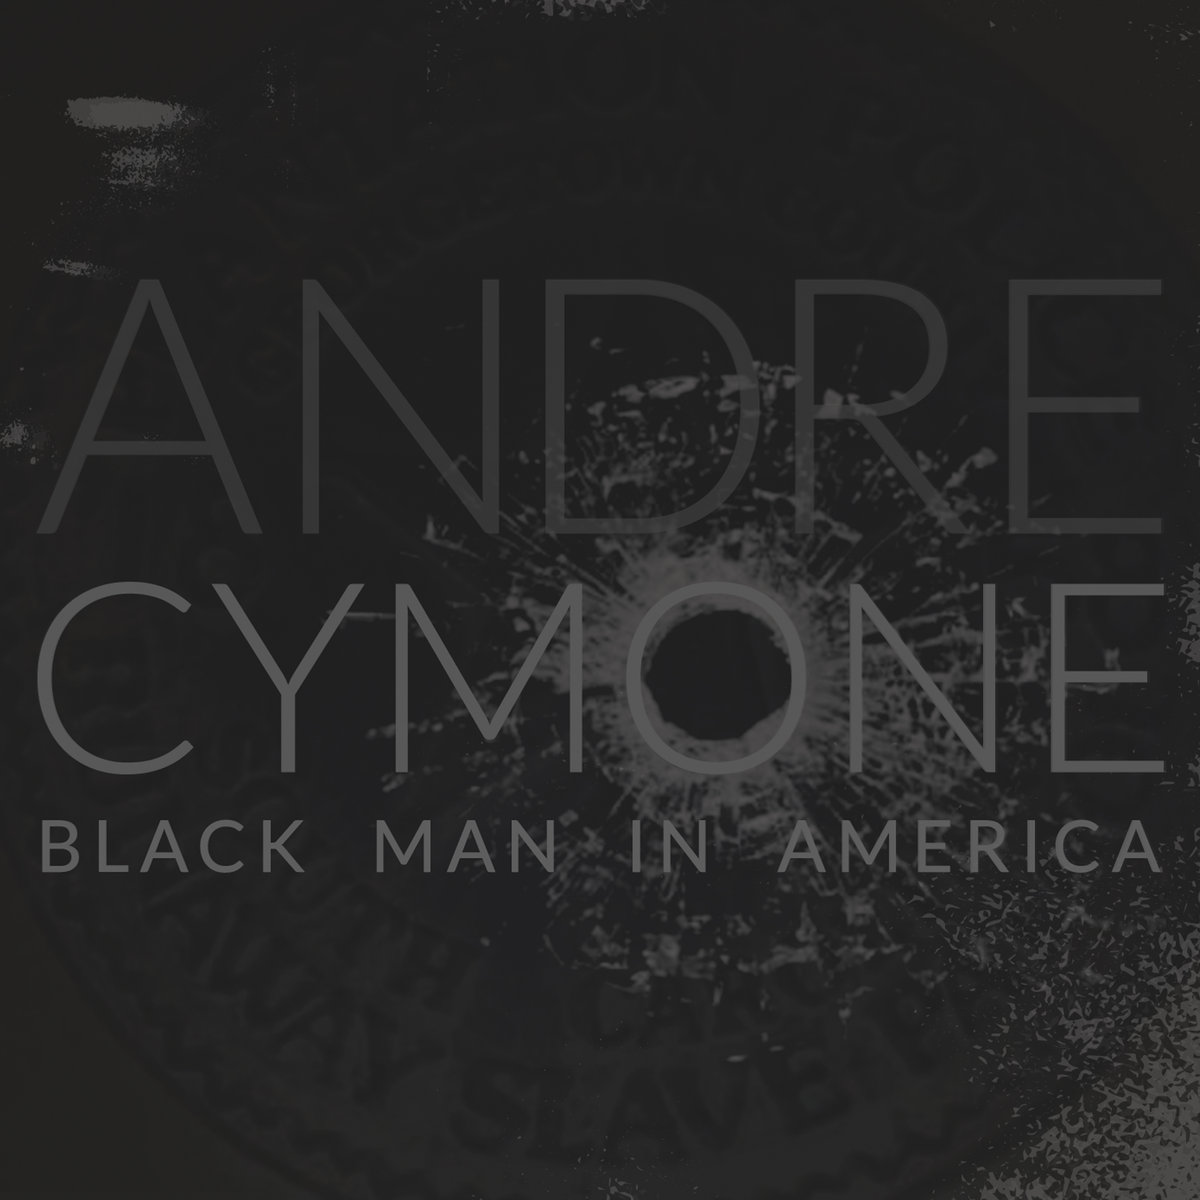 [Albums You Should Love] Andre Cymone – “Black Man In America”